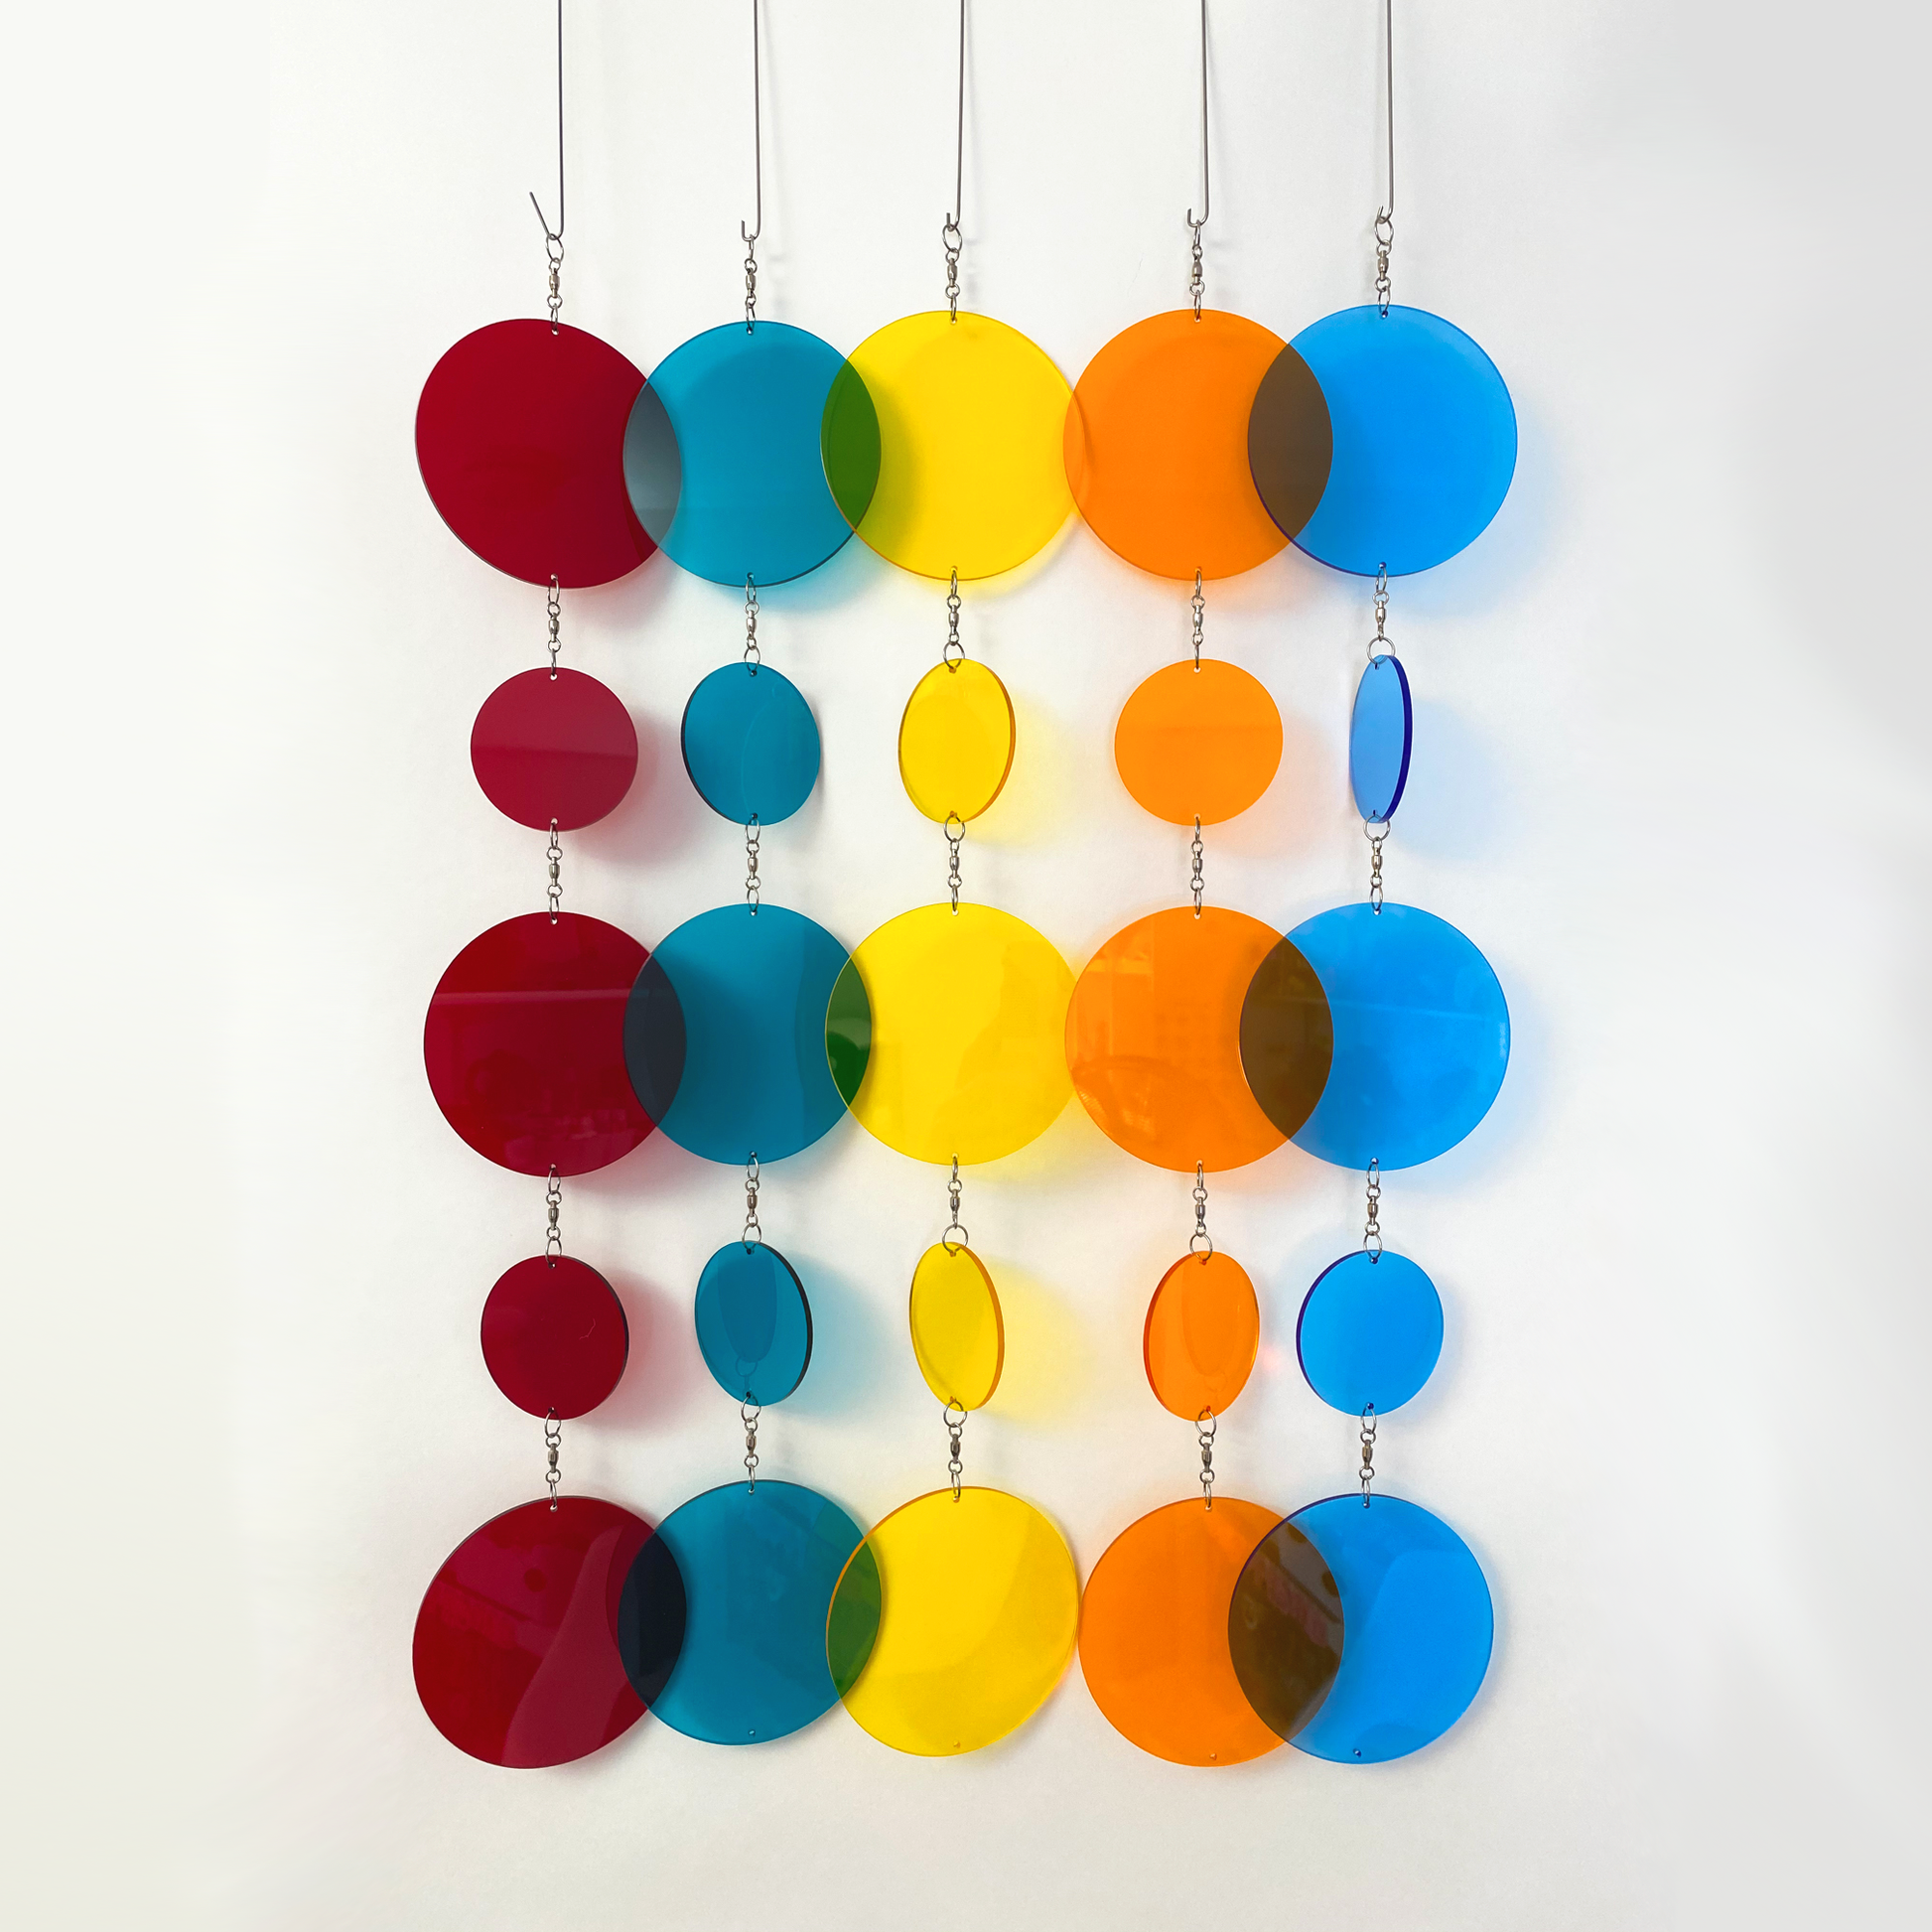 Mod Twirlies - vertical mobiles in bold reflective clear acrylic colors of red, teal, yellow, orange, and blue - by AtomicMobiles.com